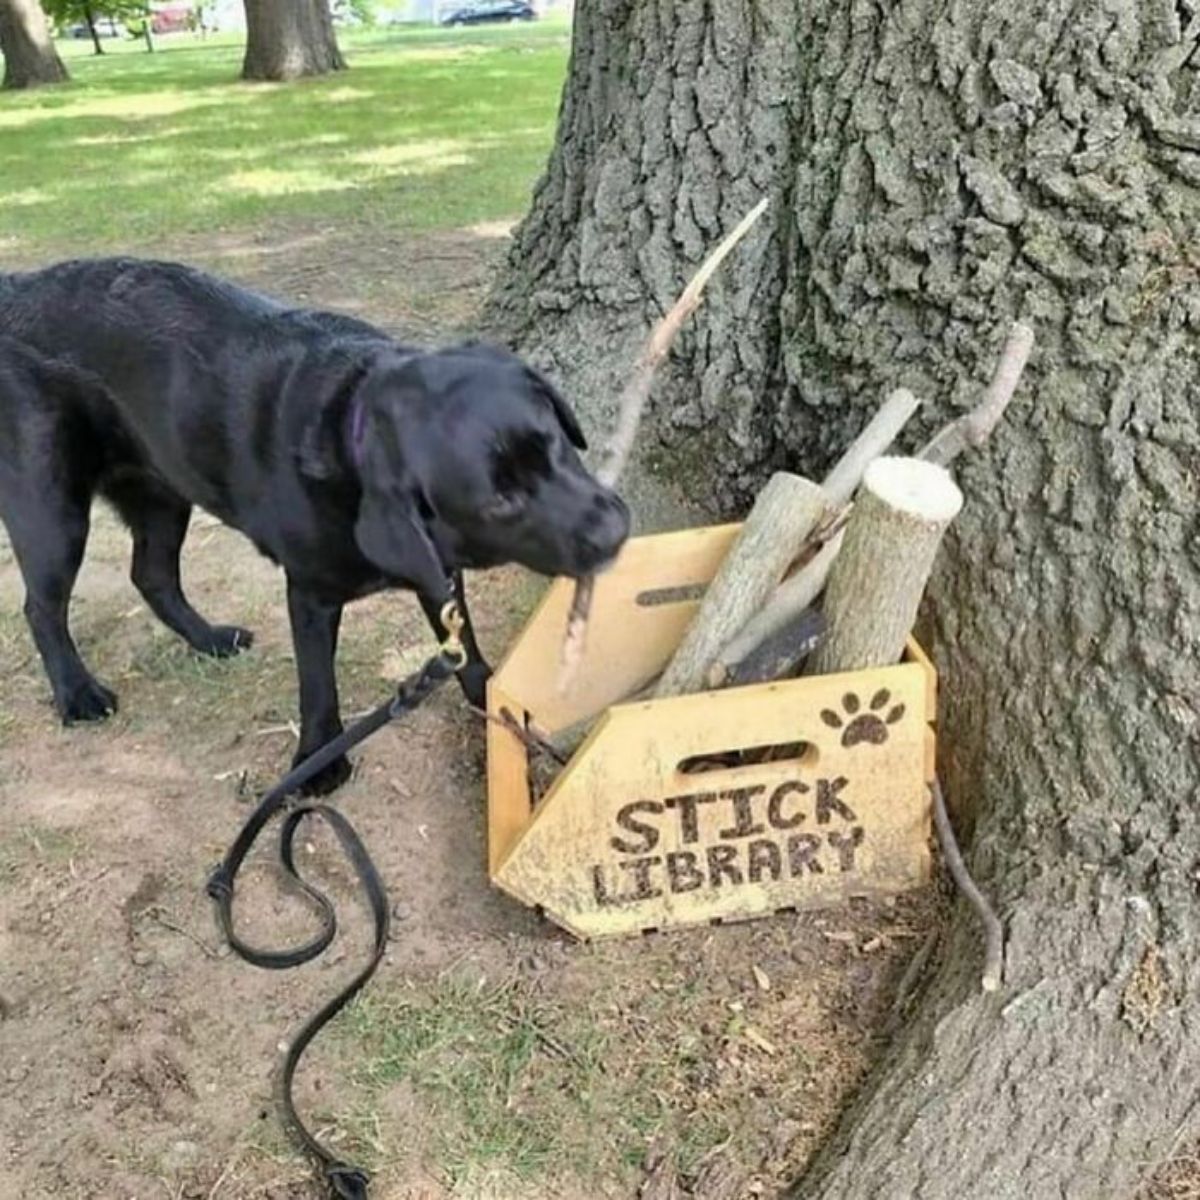 black labrador on a black leash taking a stick out of a wooden box full of sticks that says stick library left by a tree